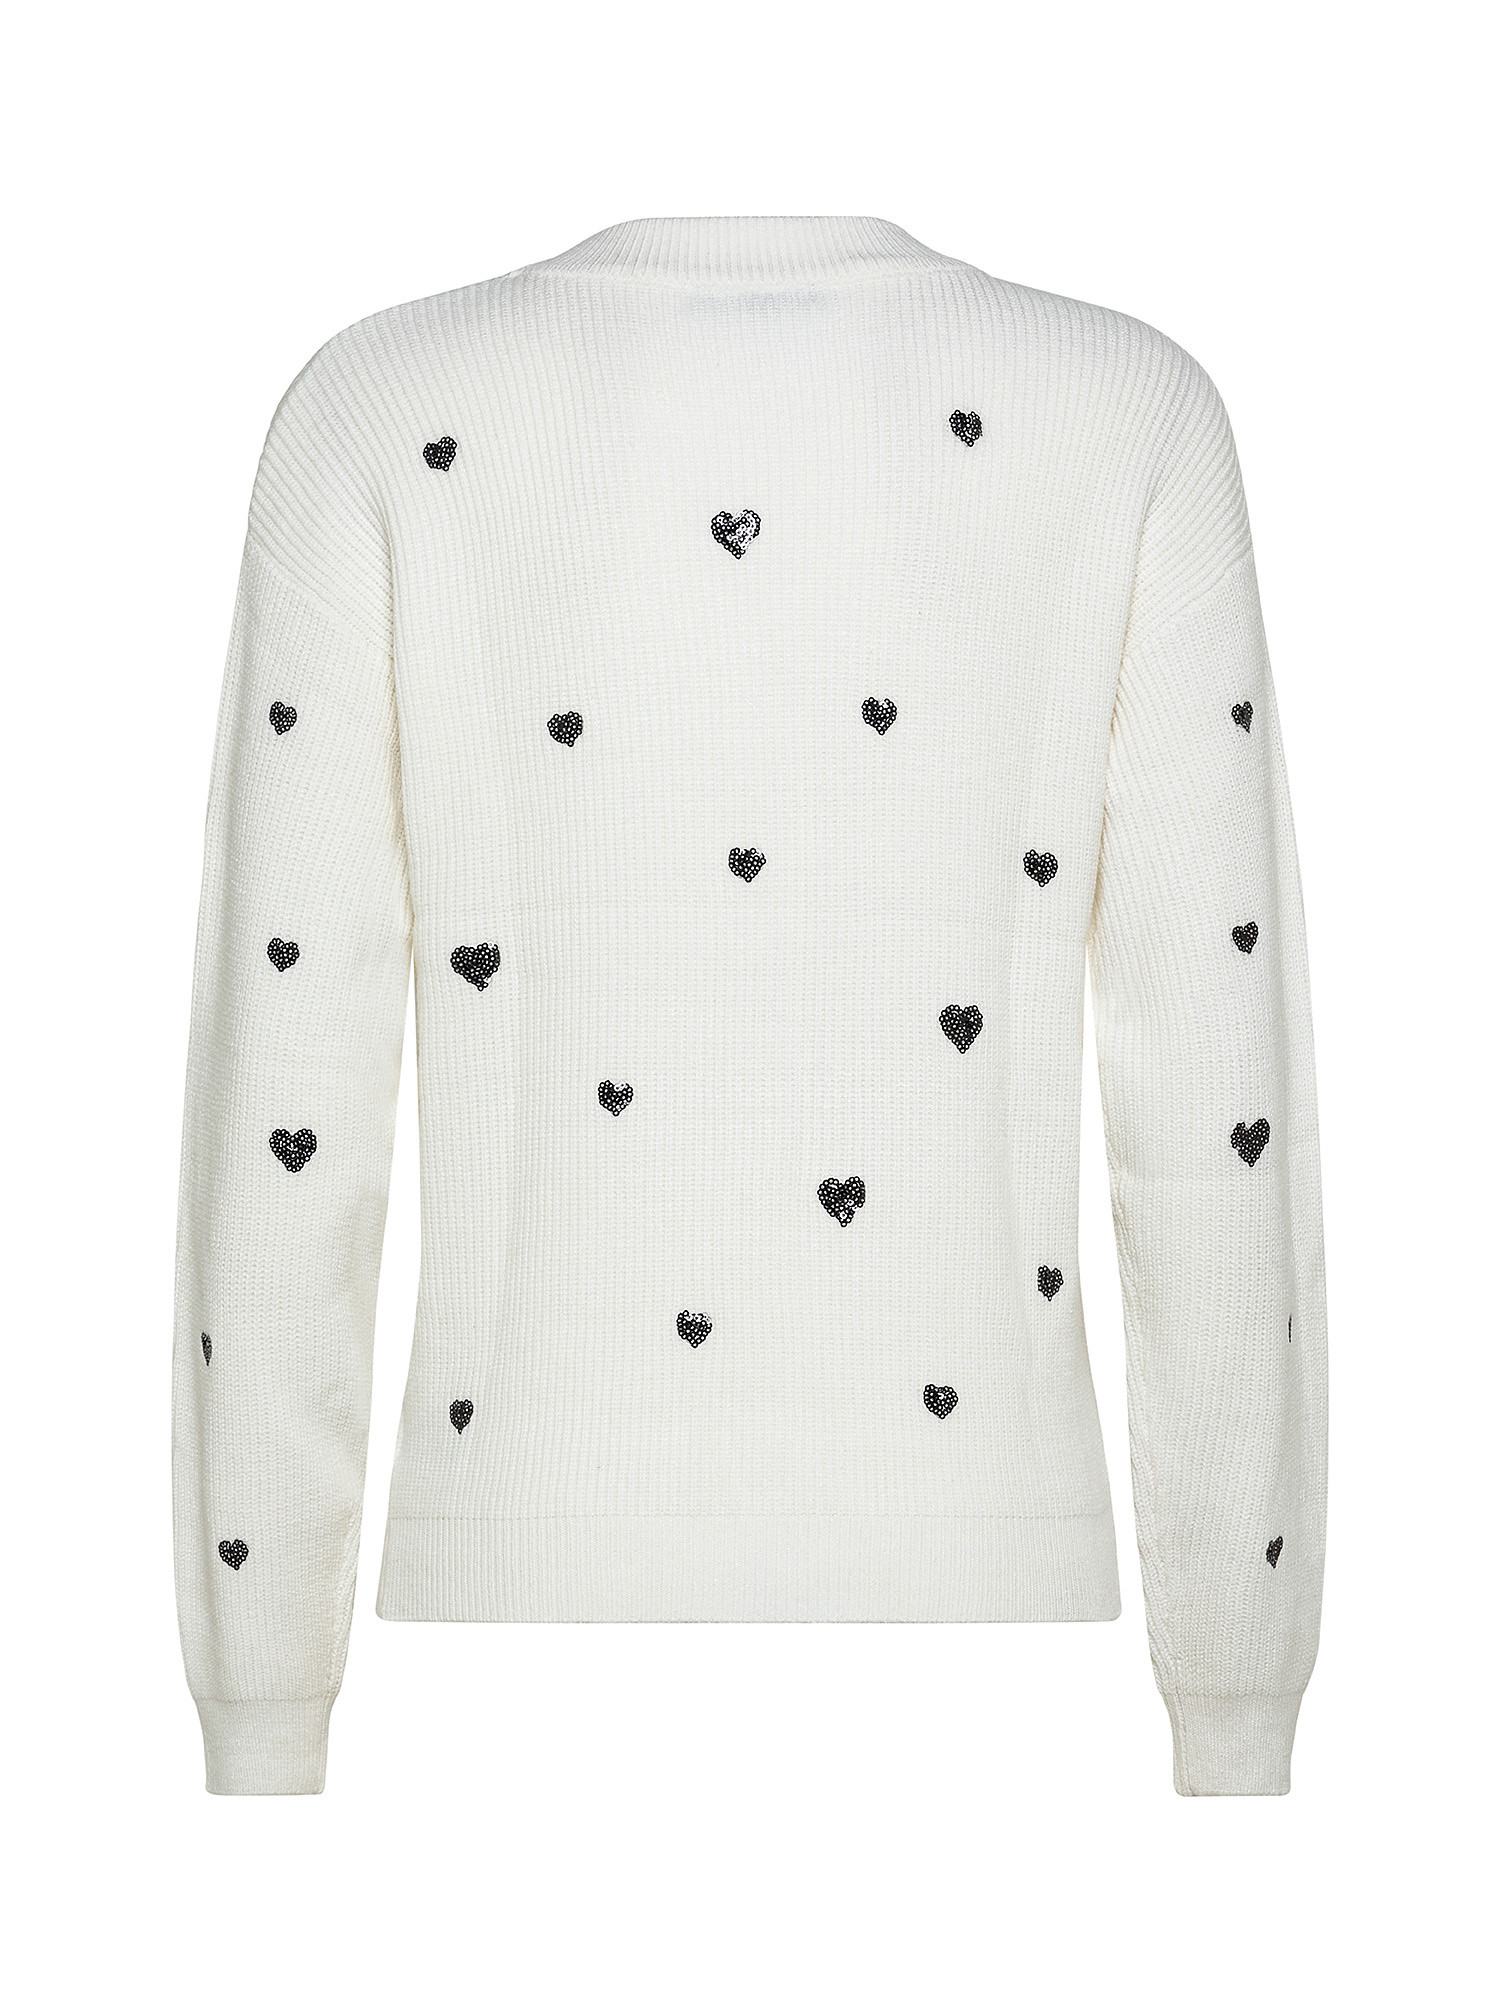 Sweater with sequined hearts, White, large image number 1